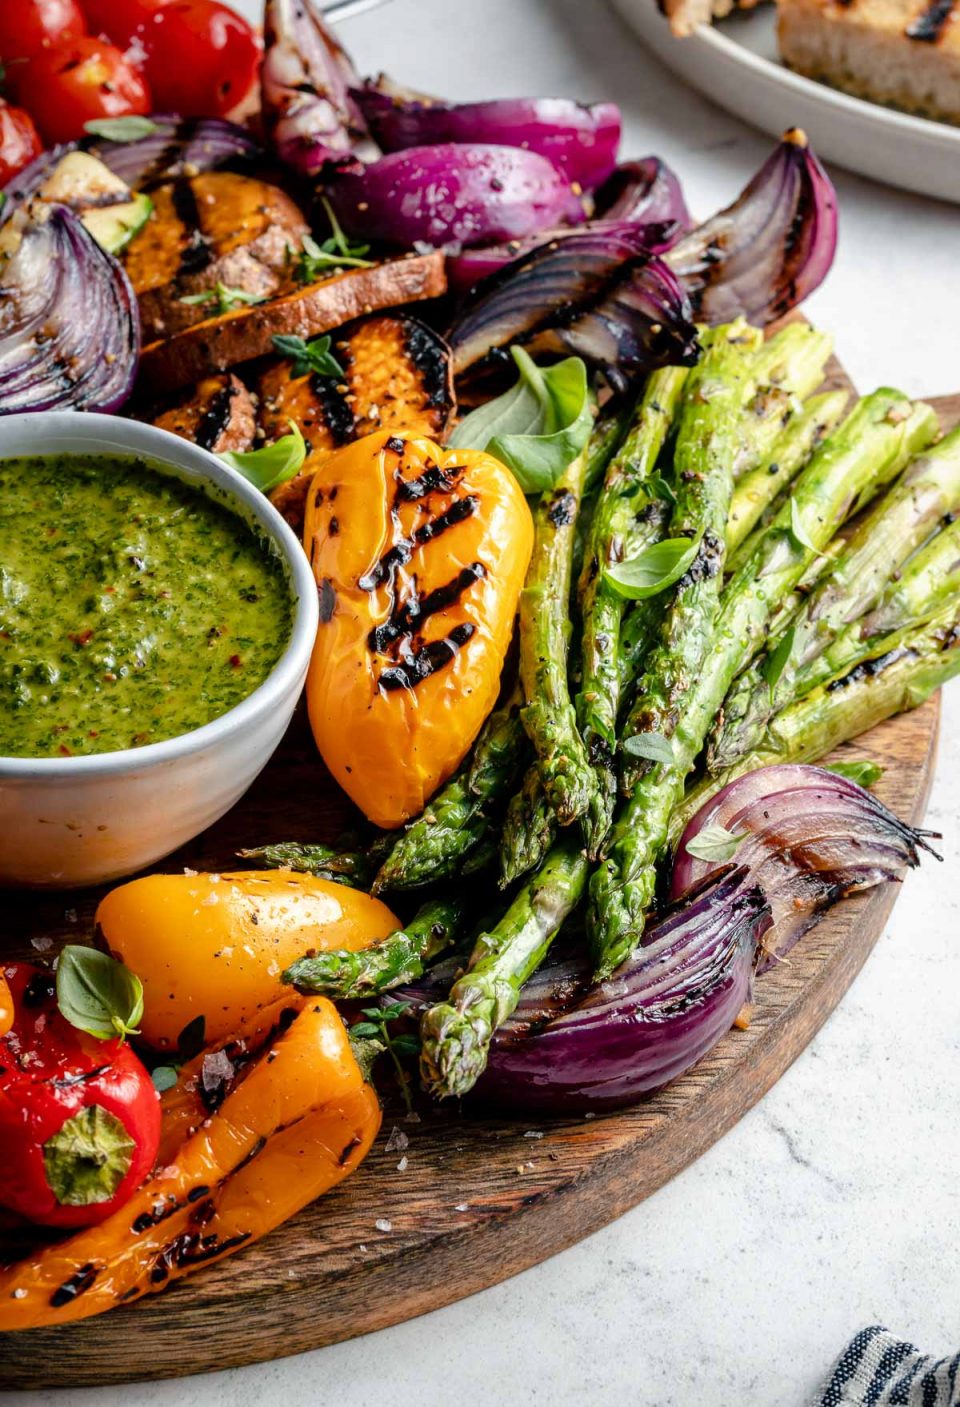 An angled shot of grilled veggies arranged on top of a round wooden cutting board. The grilled veggies include grilled onion, grilled tomato skewers, grilled asparagus, grilled sweet potatoes, & grilled bell peppers. The grilled veggies are garnished with fresh herbs & surround a small white bowl of chimichurri sauce for dipping that also rests on the cutting board. A white ceramic plate filled with grilled bread sits in the background and a small portion of a blue & white linen napkin rests in the foreground. All serving ware sits on top of a blue & white marbled surface.